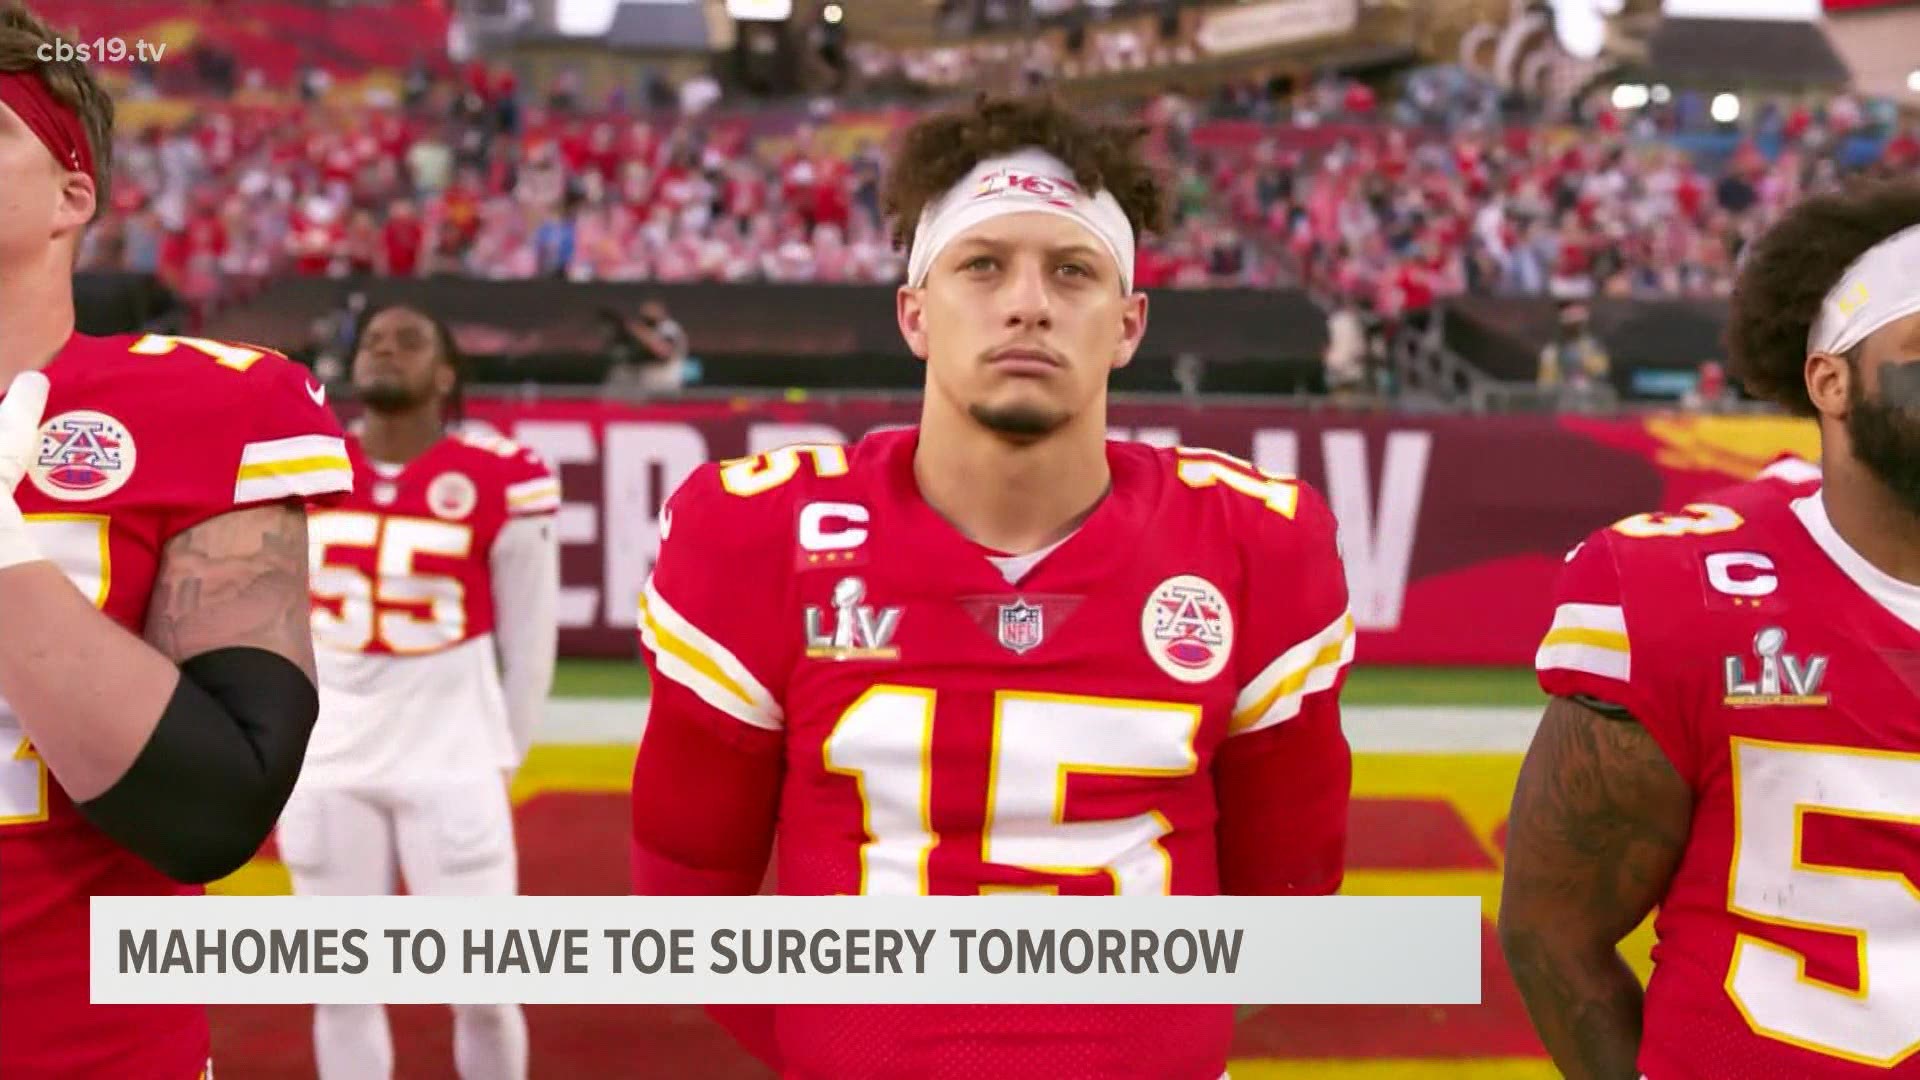 The NFL Network reports foot specialist Green Bay-area surgeon Dr. Robert Anderson will perform Mahomes' procedure.